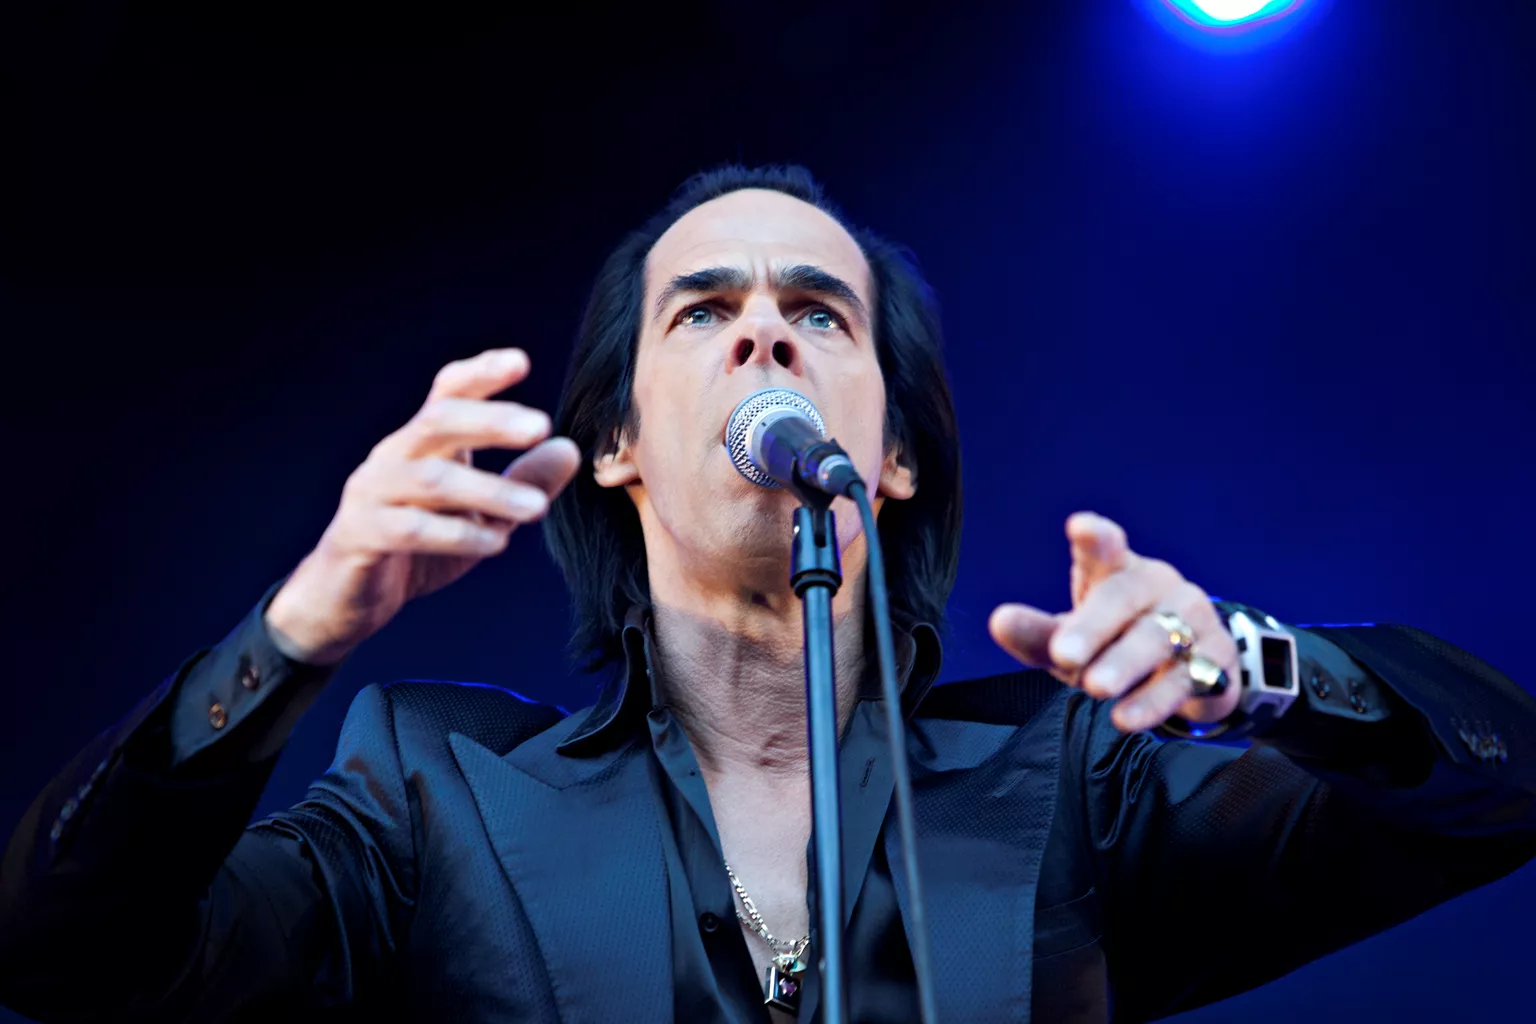 Nick Cave attends coronation: ‘Most important historical event’